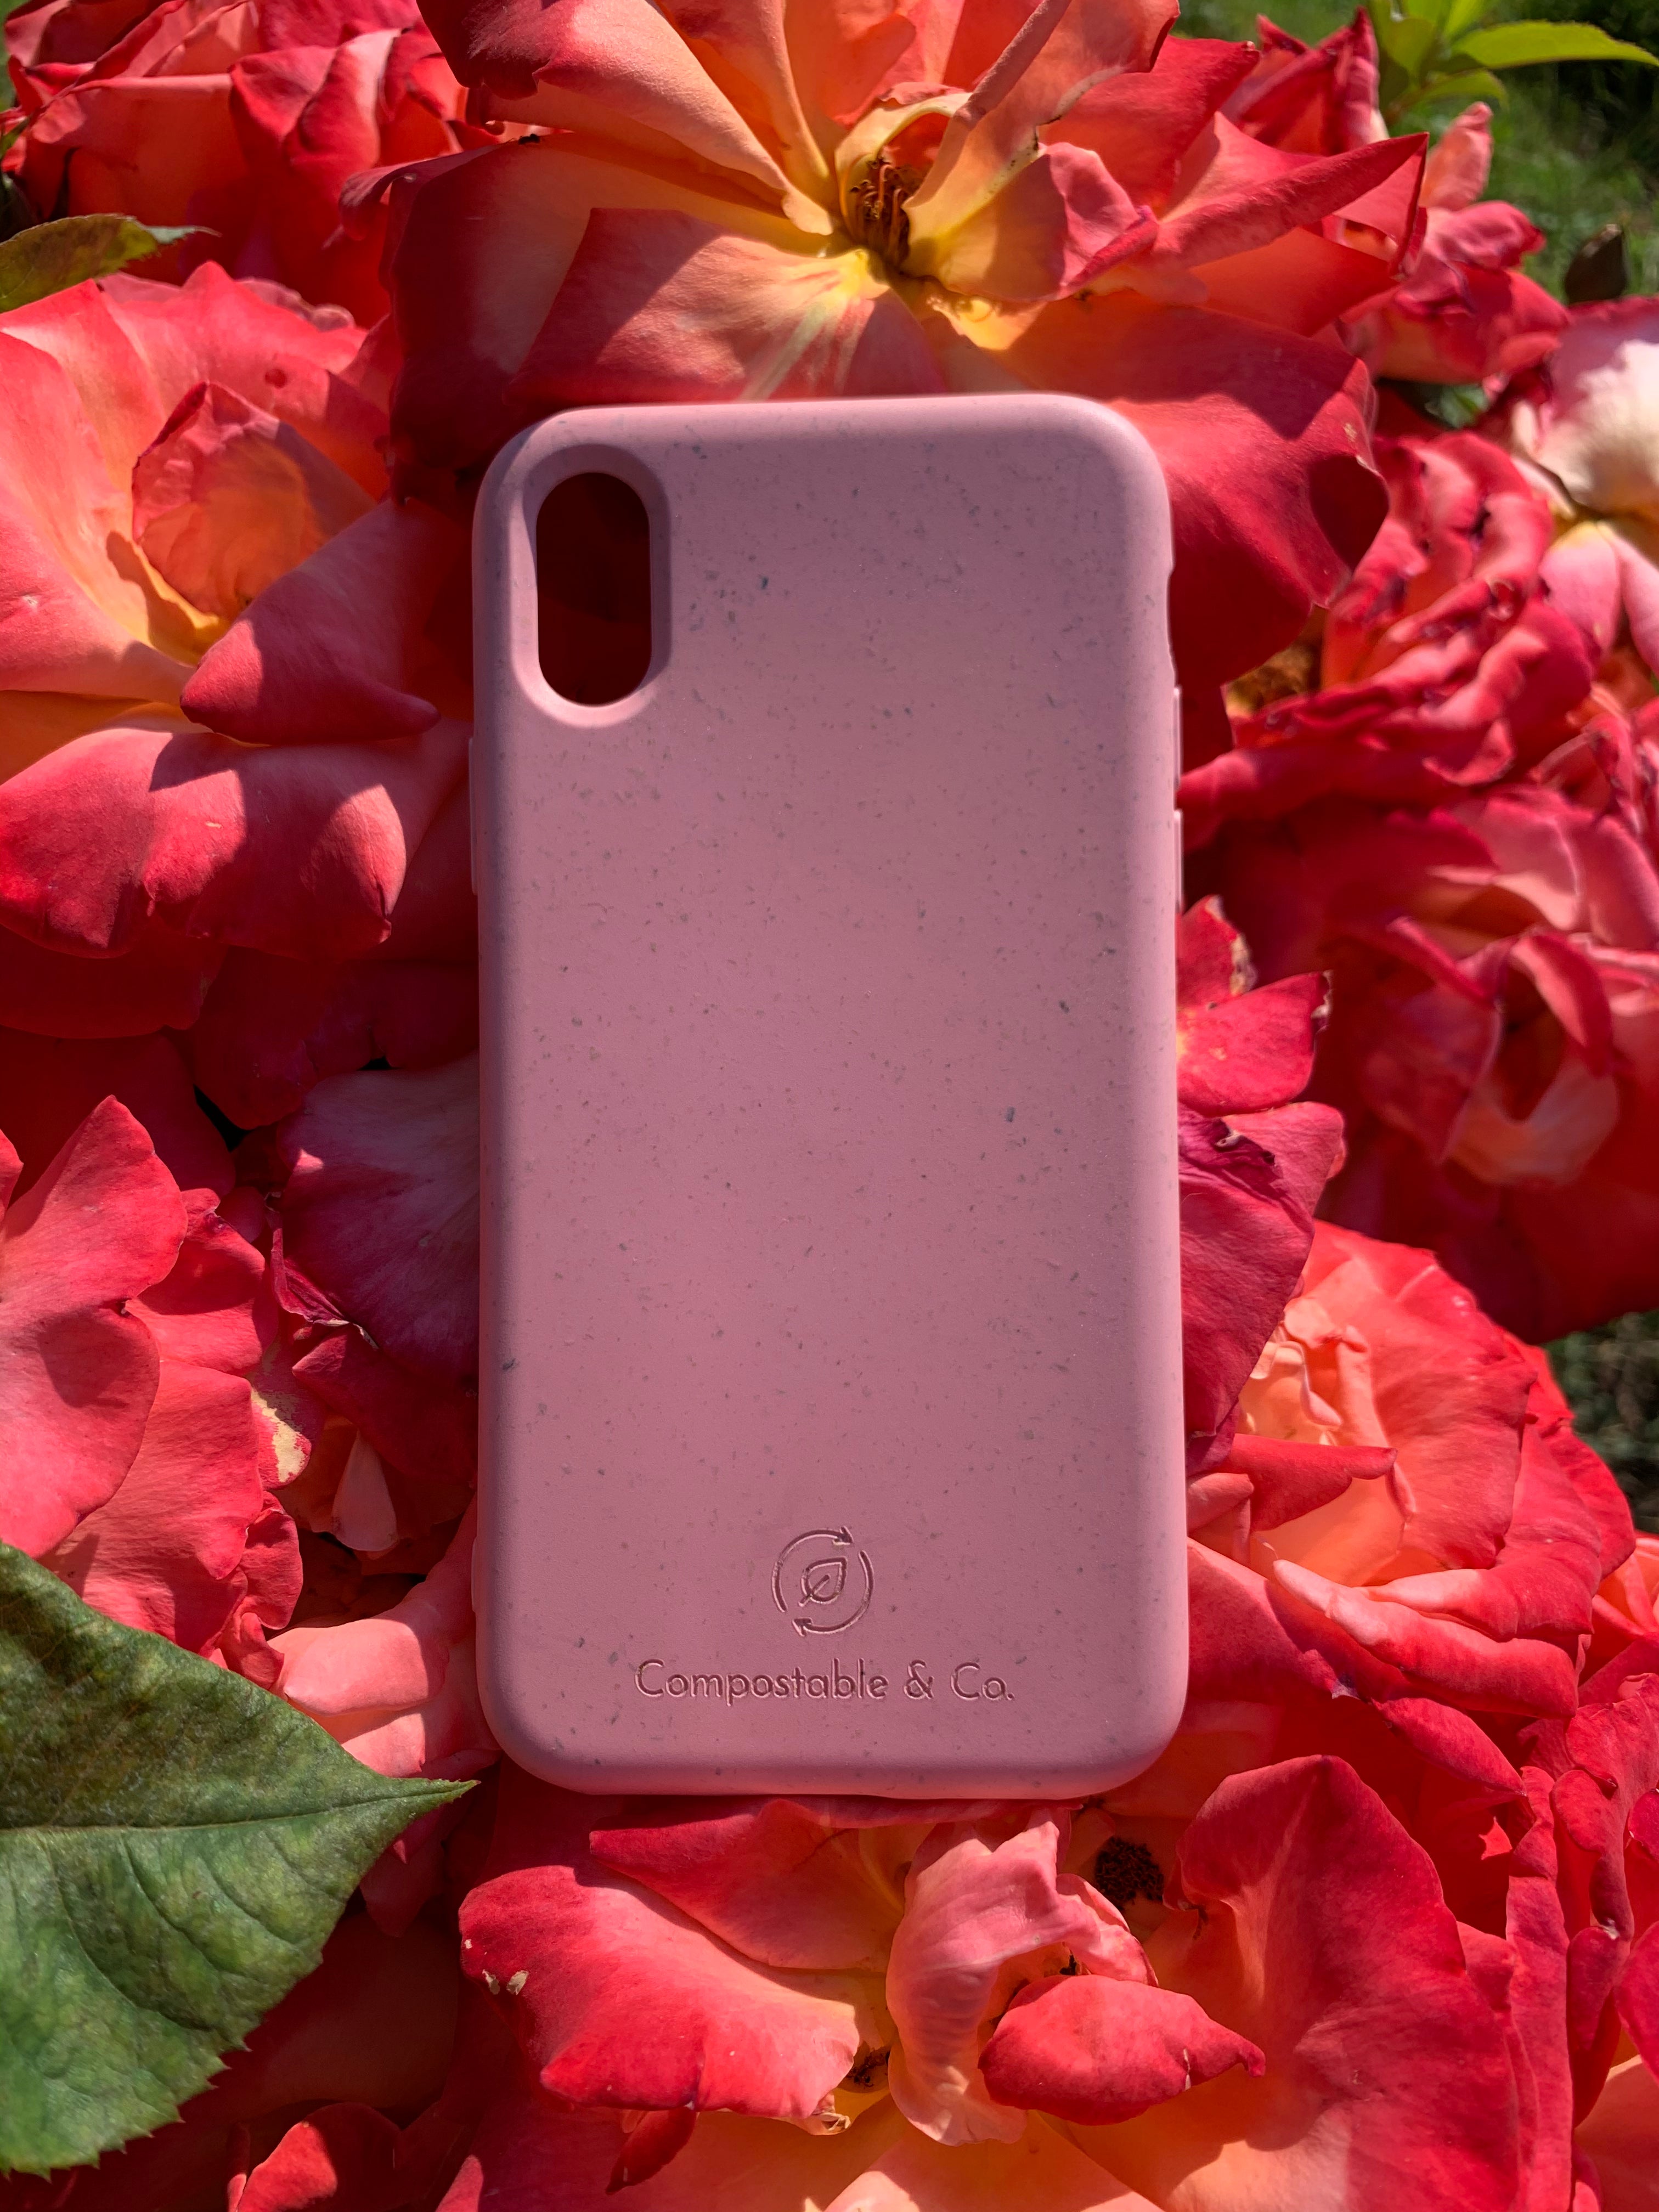 Compostable & Co. iPhone x / xs pink biodegradable phone case with rose background